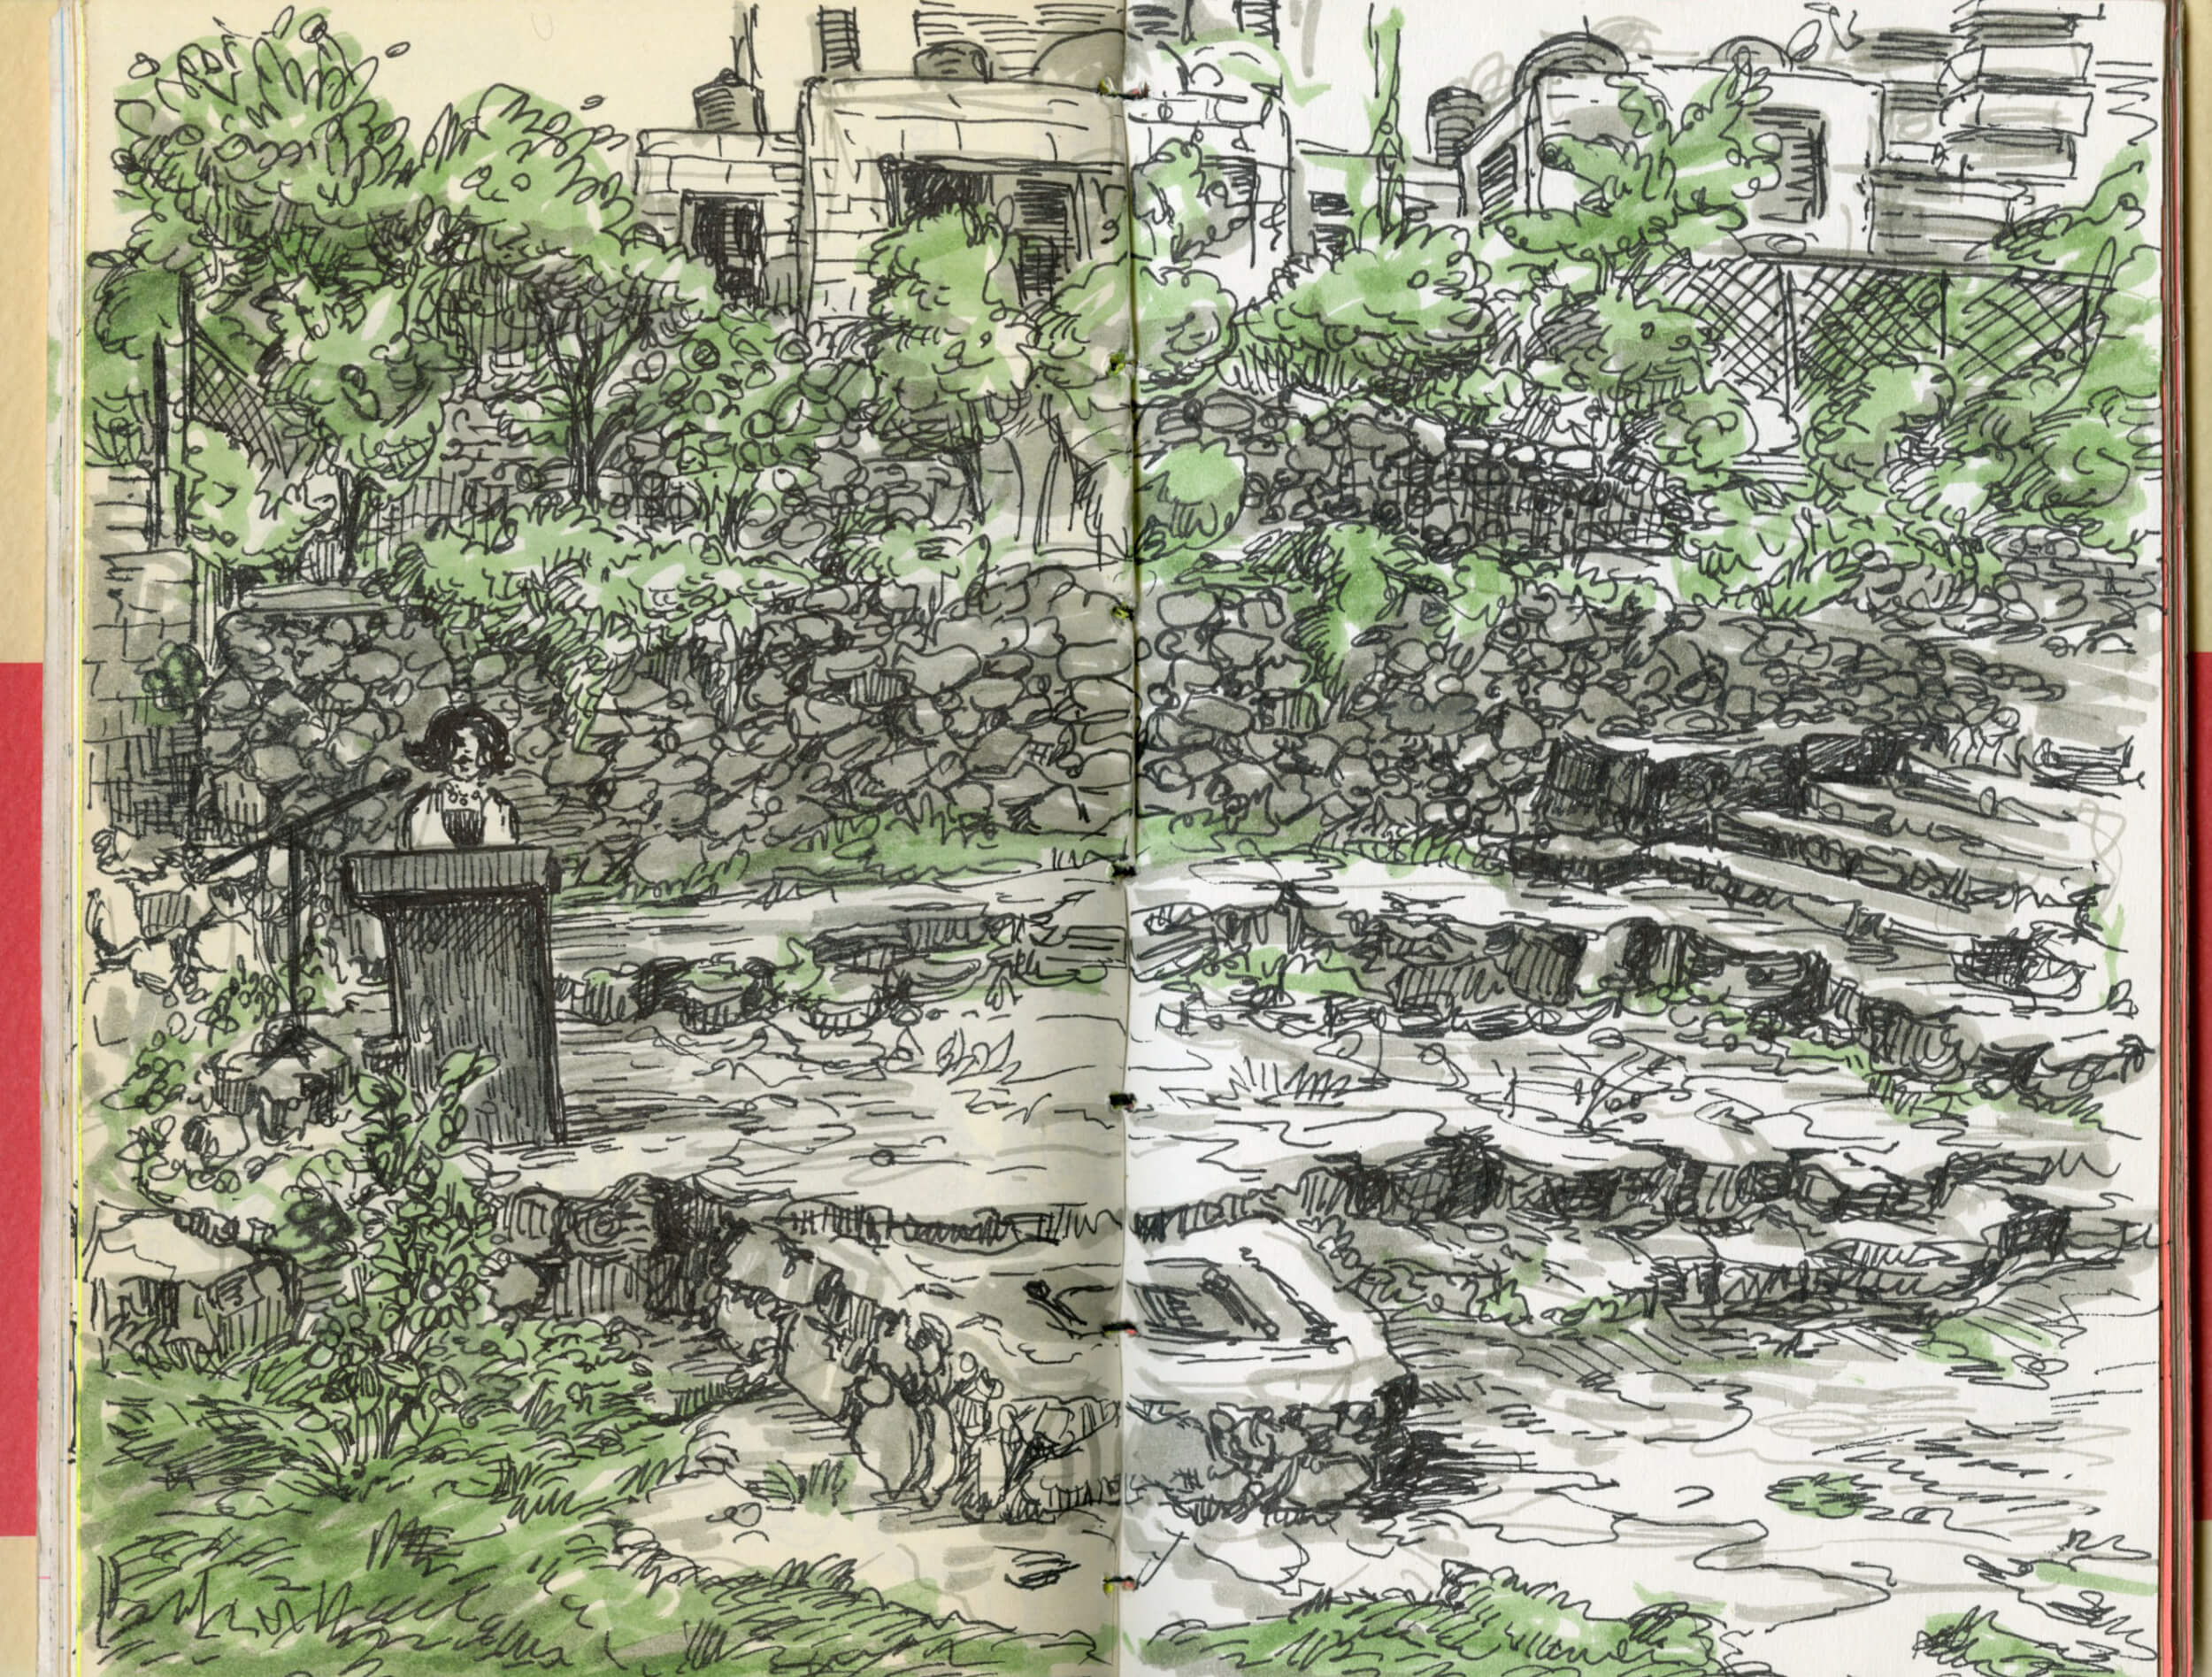 PalFest 2015’s closing night in Ramallah. (Sketch by Molly Crabapple)